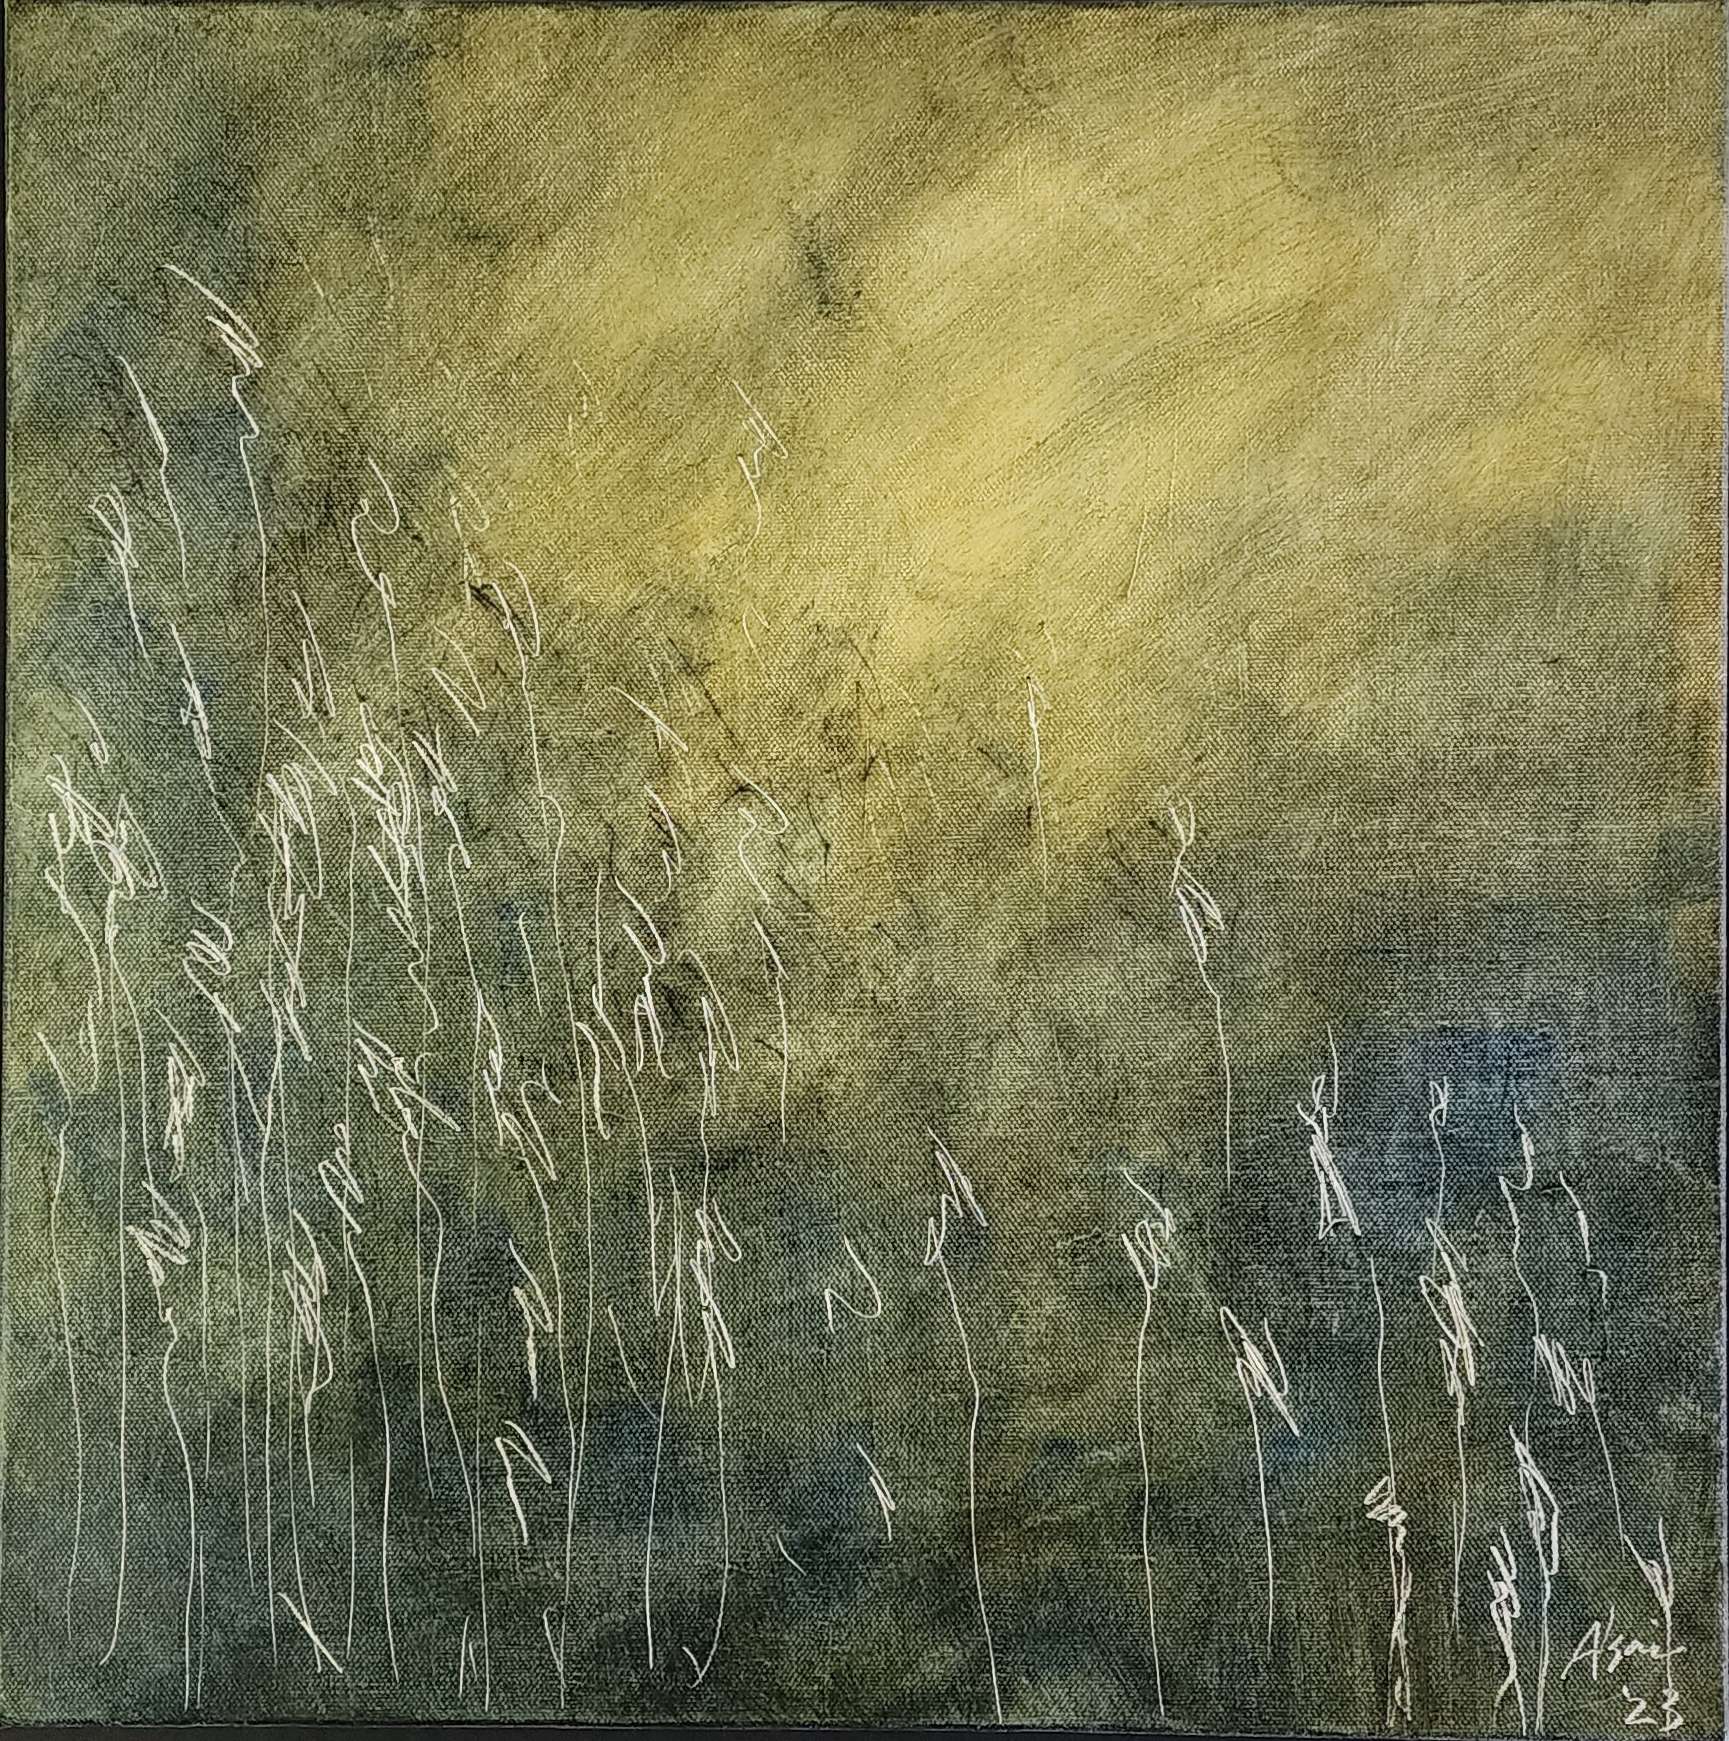 Small Grasses III, oil and graphite on canvas by Pamela Asai